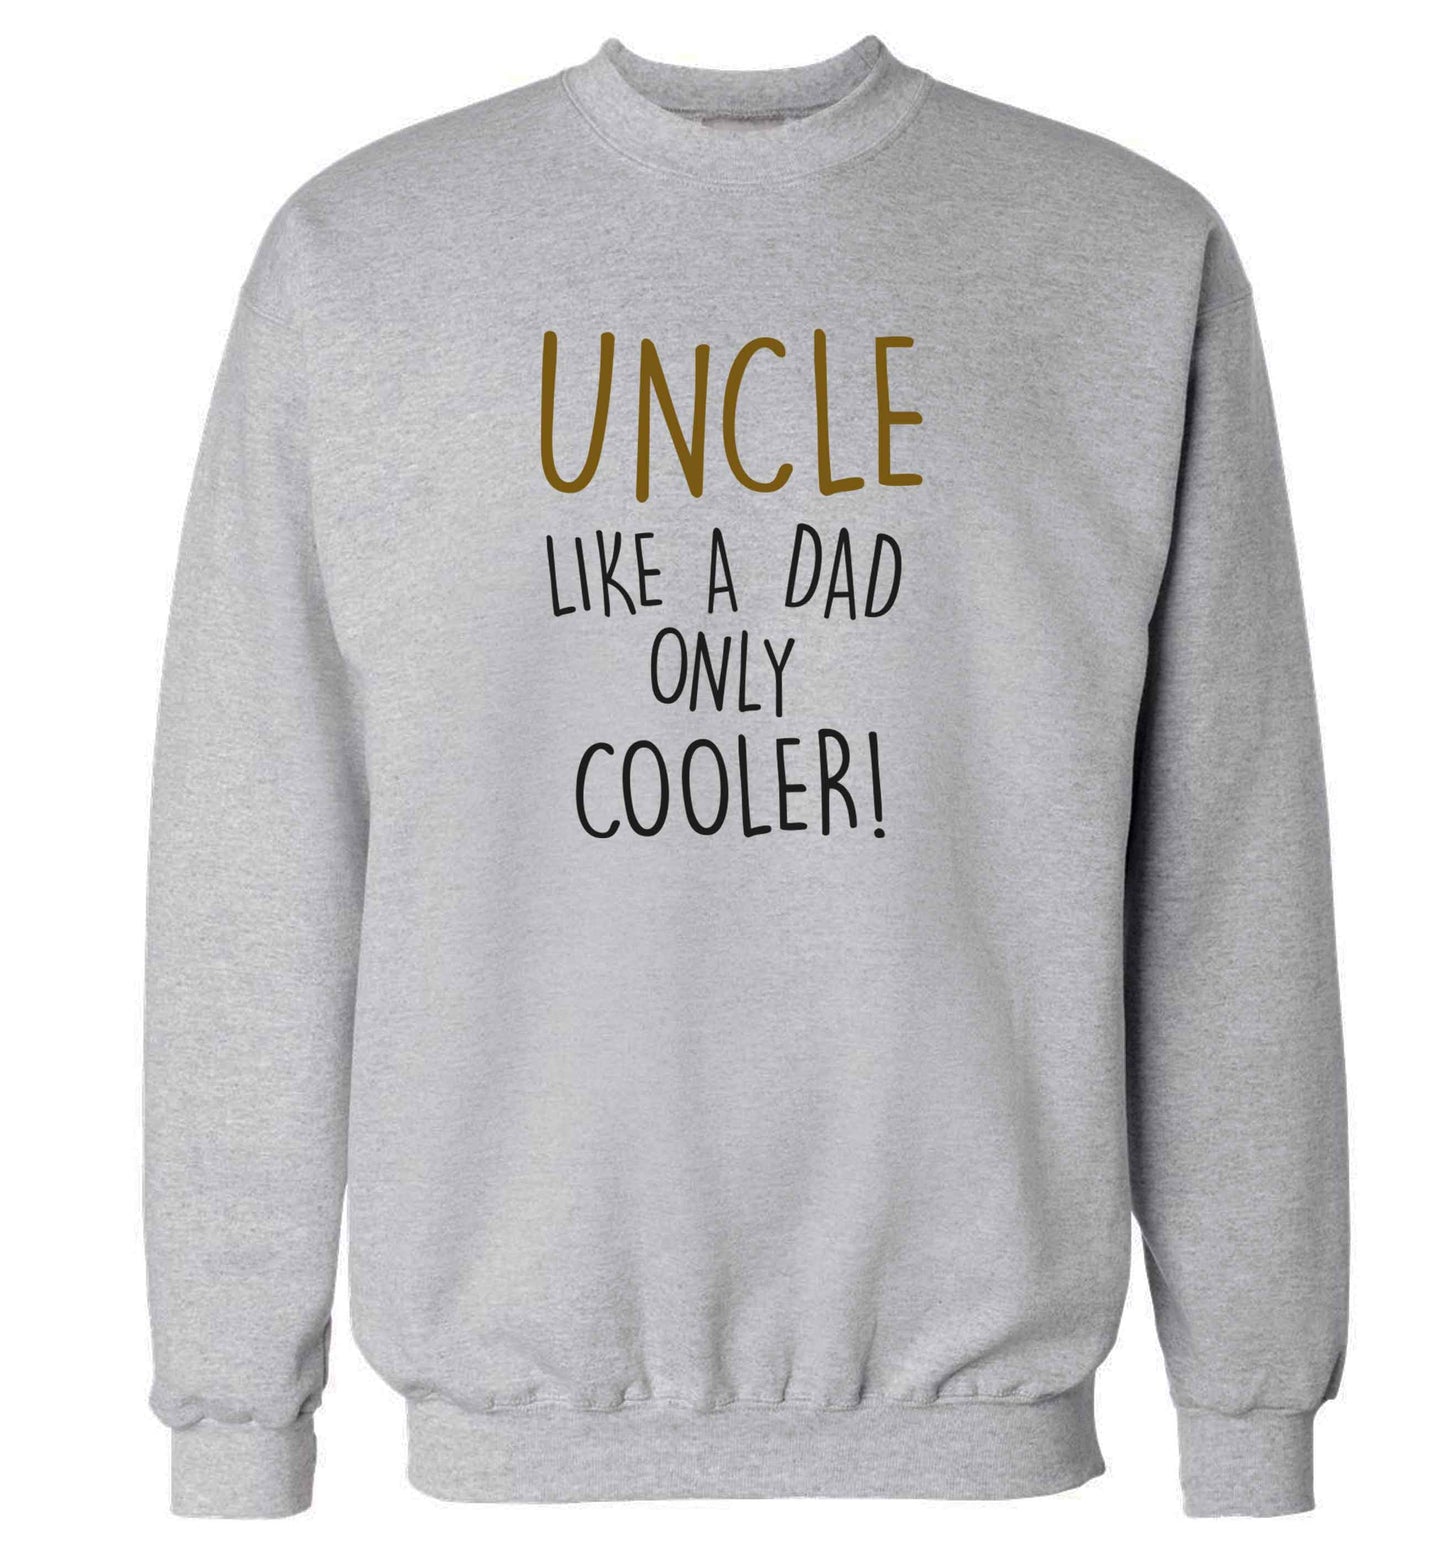 Uncle like a dad only cooler adult's unisex grey sweater 2XL